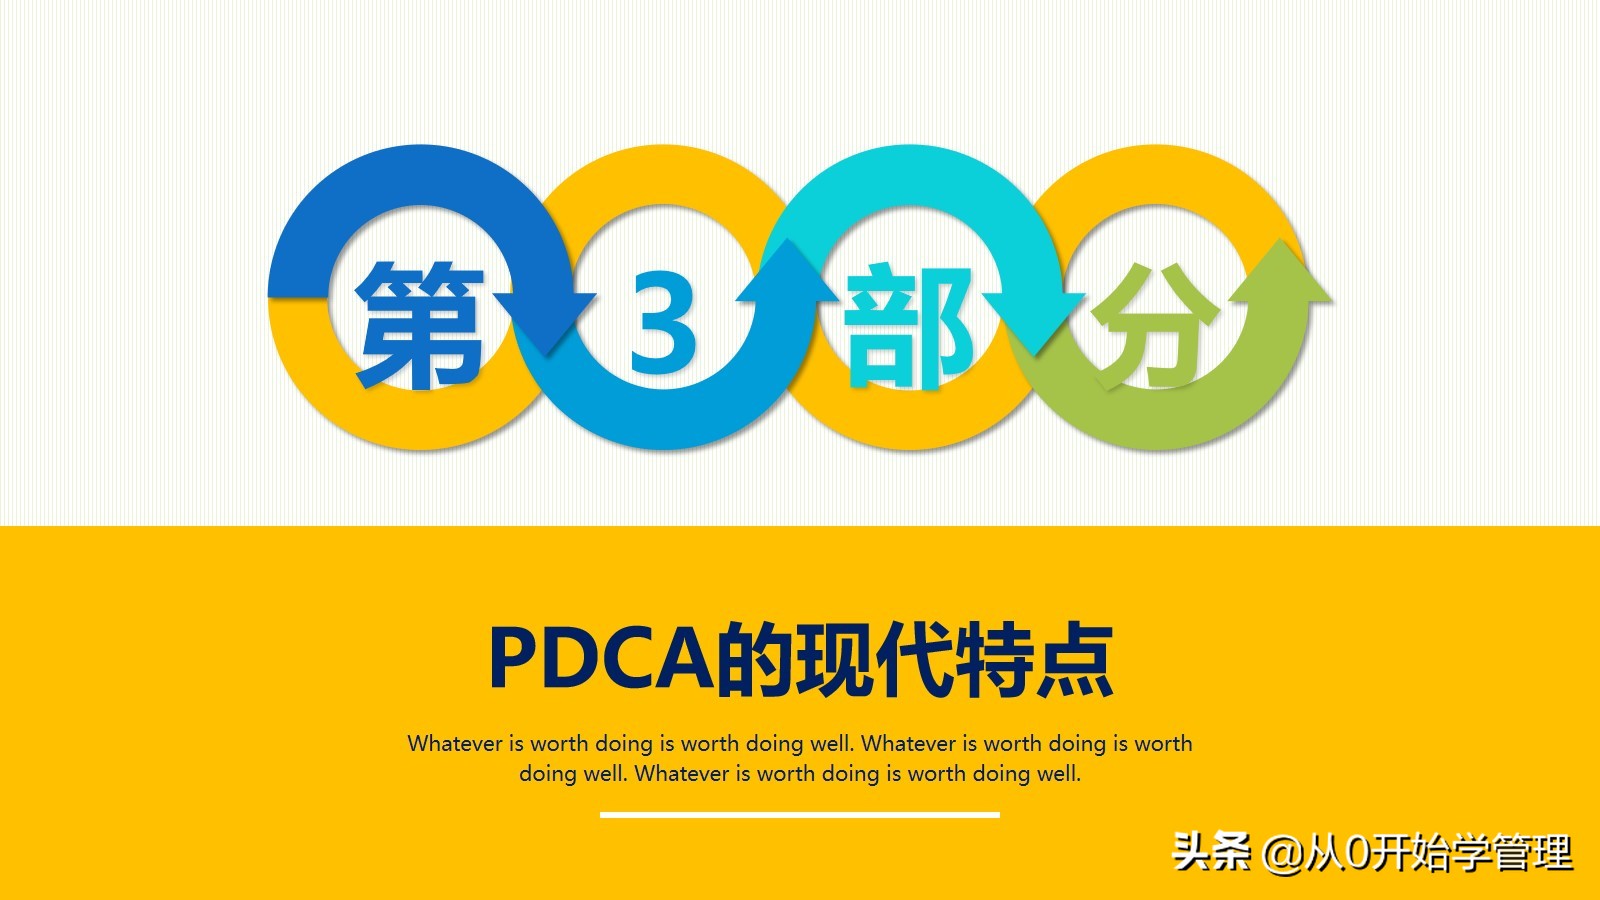 Essential management tools for managers: PDCA cycle PPT full version editable